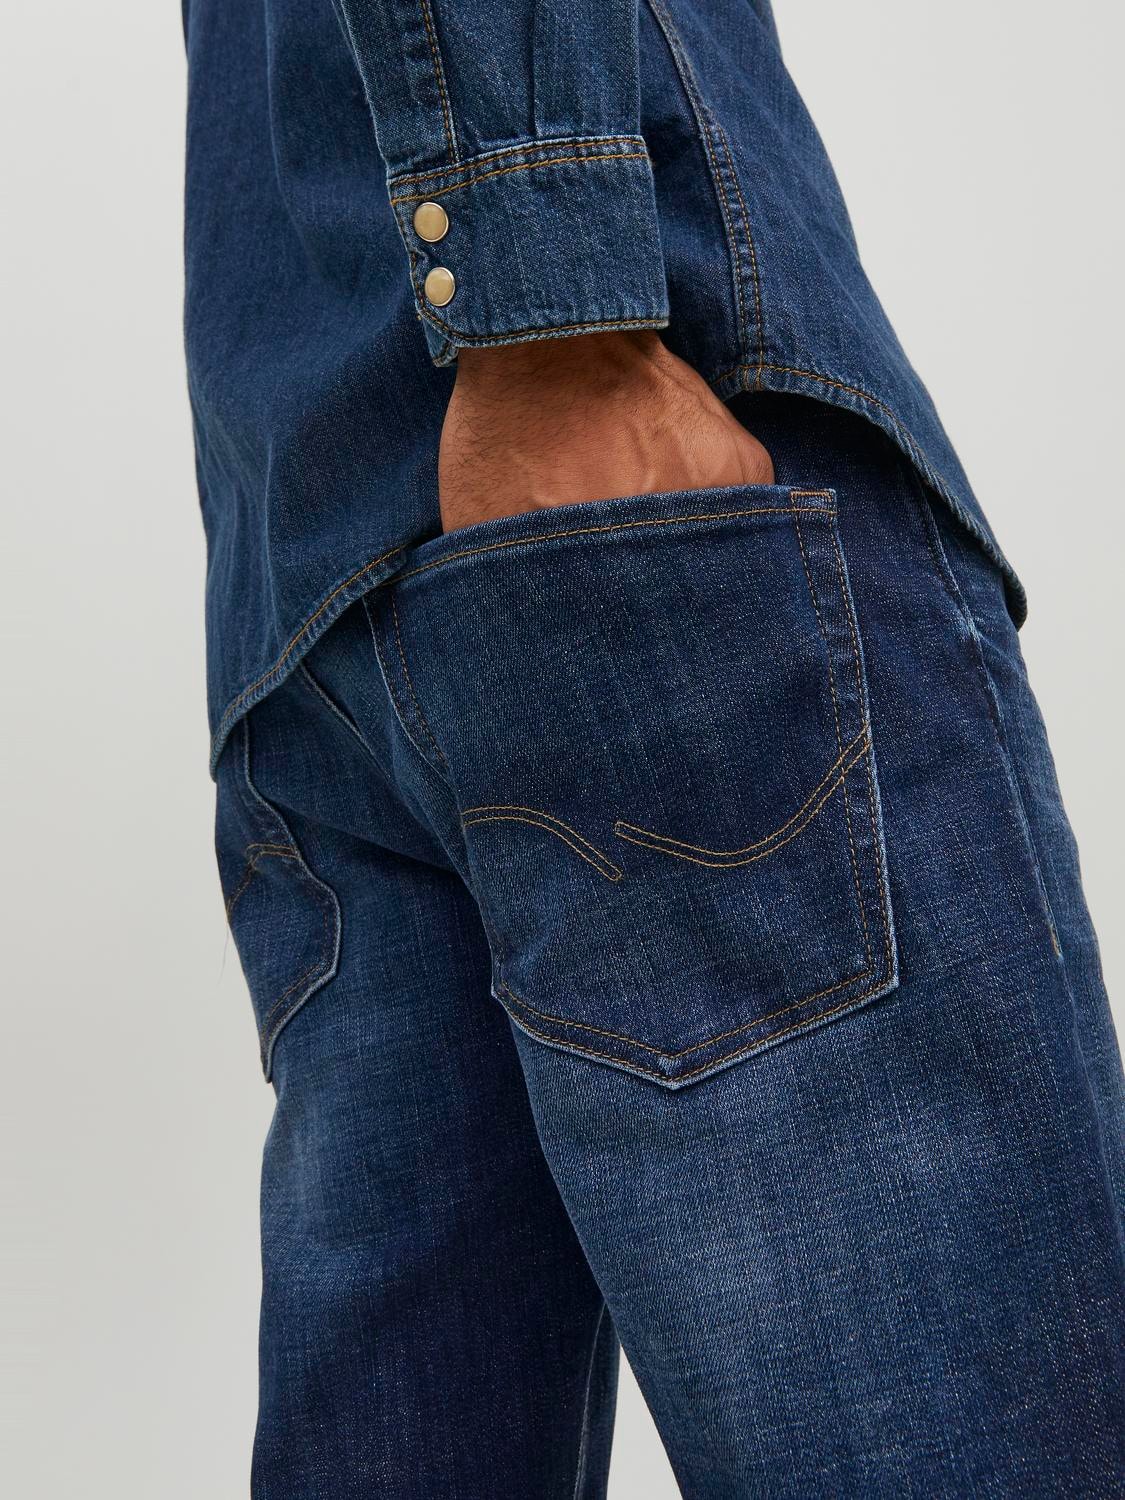 Mike 211 Comfort Fit Jeans-Back pocket view